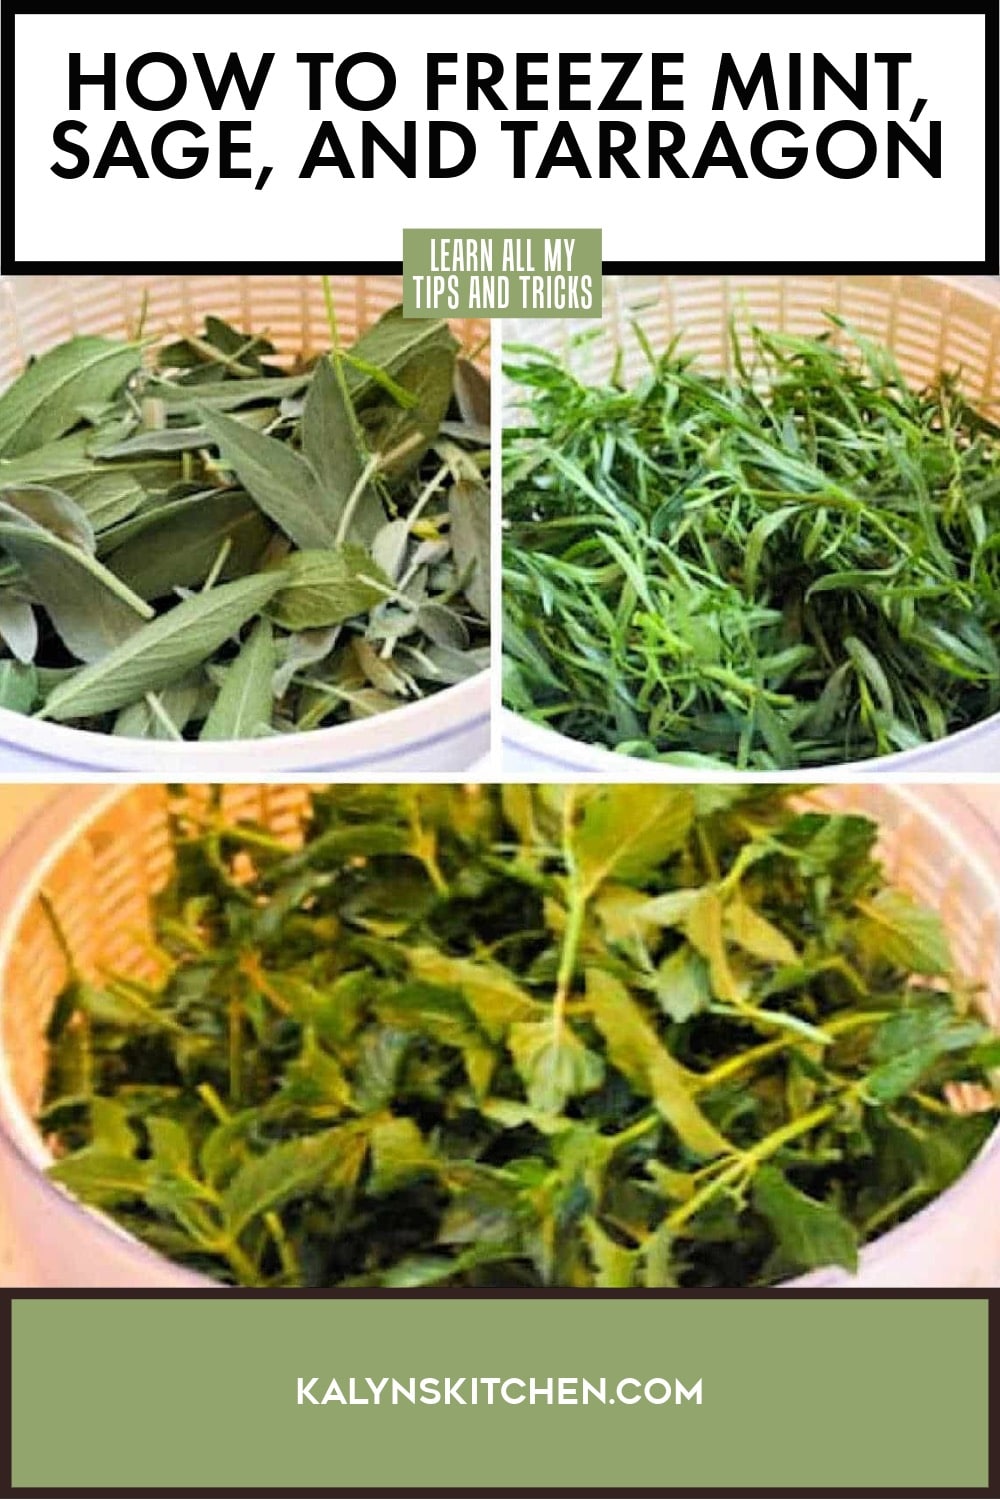 Pinterest image of How to Freeze Mint, Sage, and Tarragon